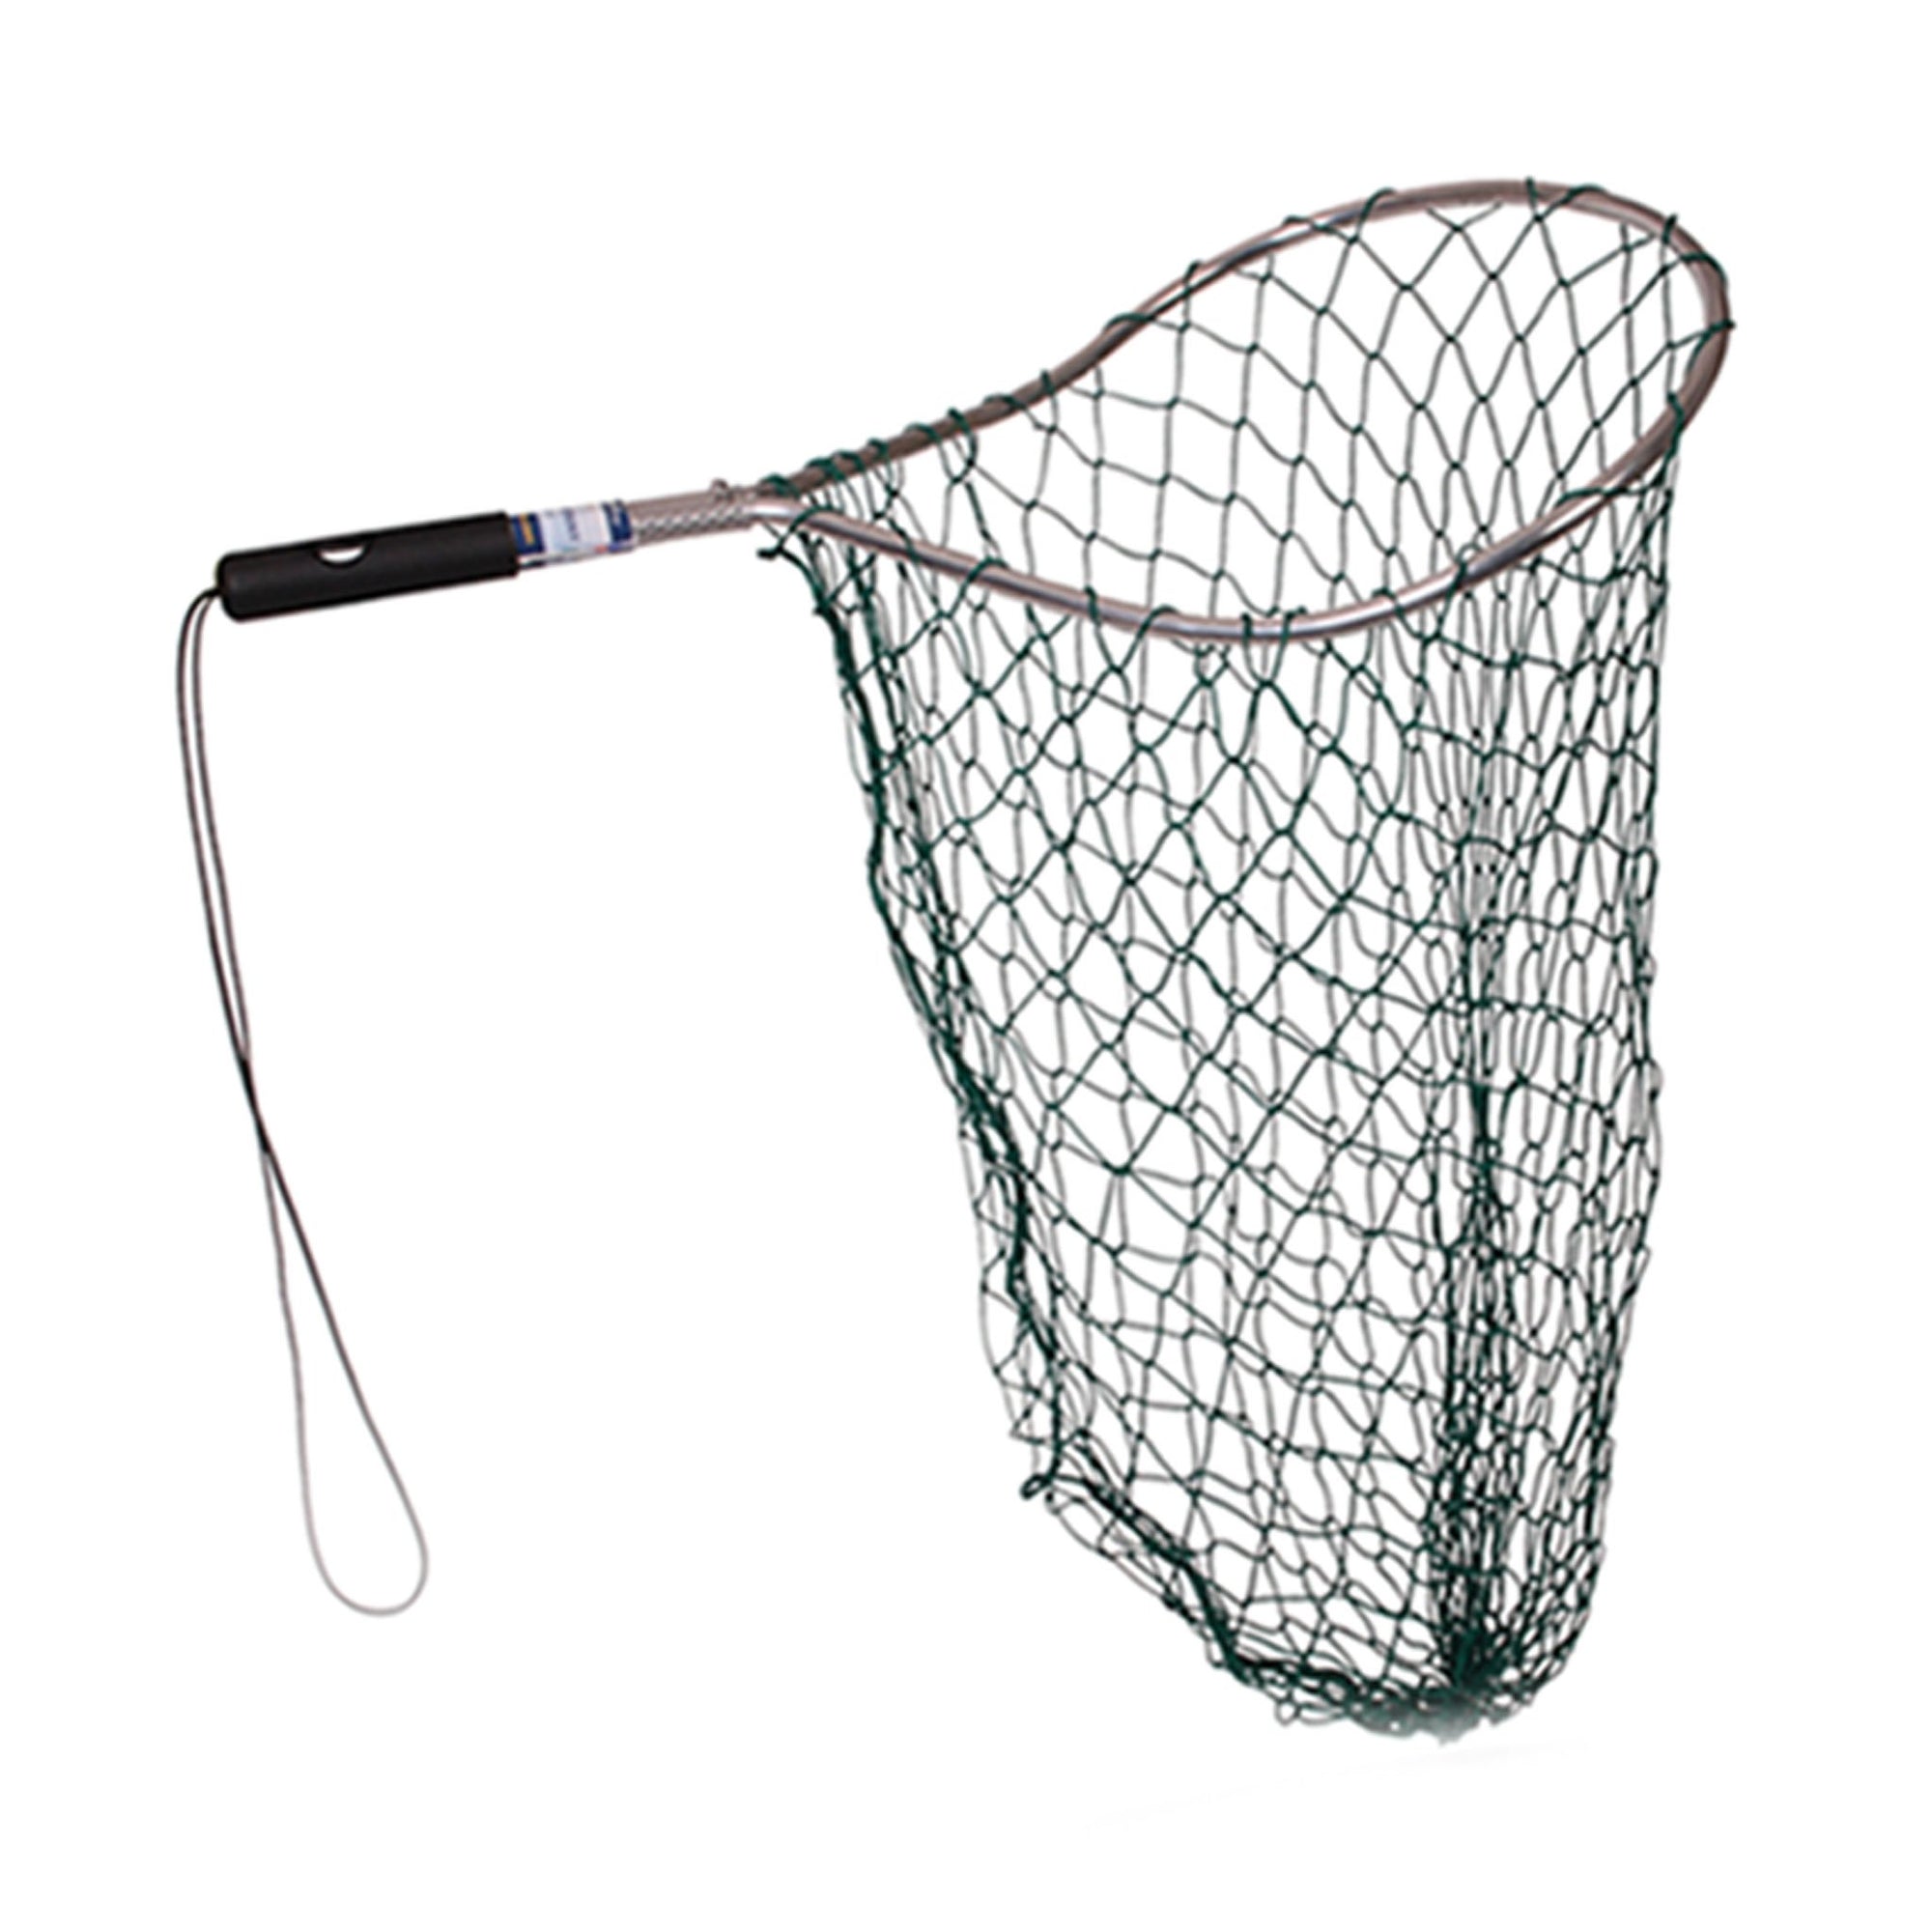 Big Game Heavy Duty Scoop Net- ONLY $4.95 SHIPPING !!!